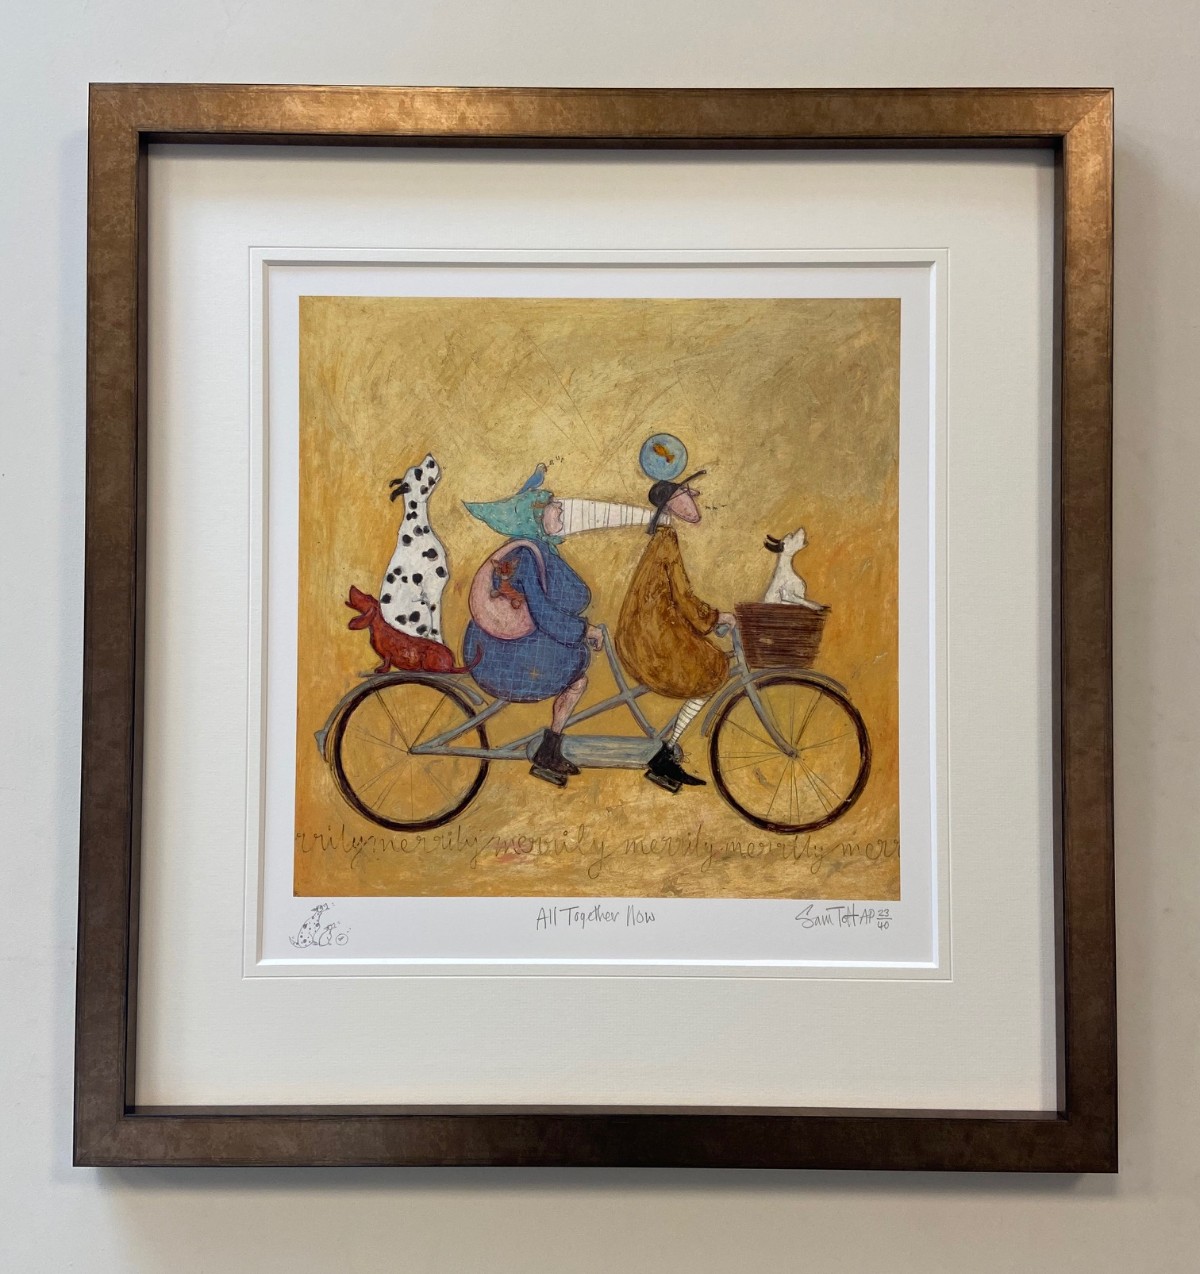 All Together Now - AP Remarque by Sam Toft